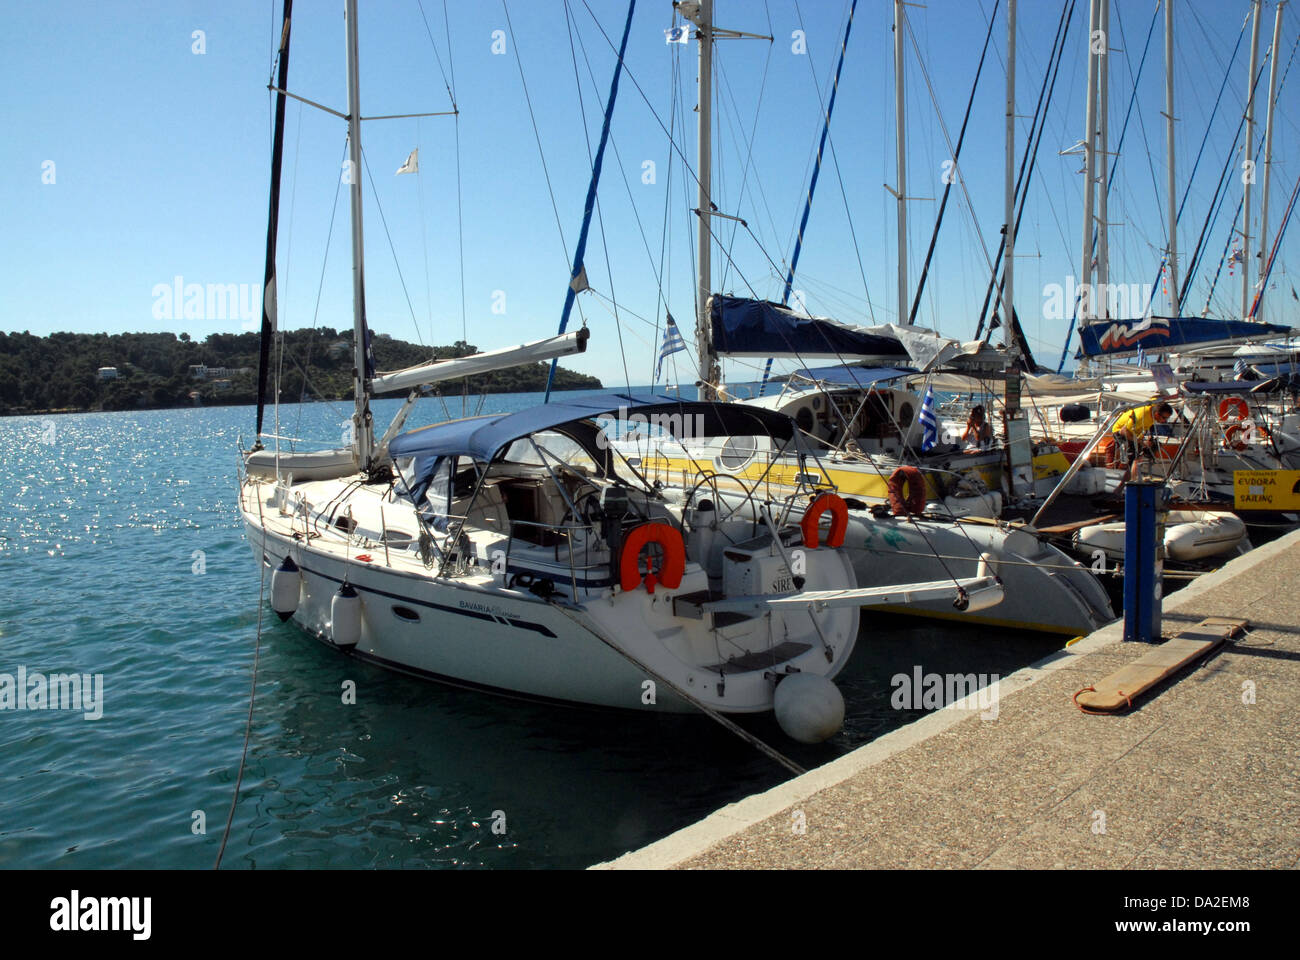 Yachts in Harbour, Sailing boats in Harbour, Greece. Stock Photo